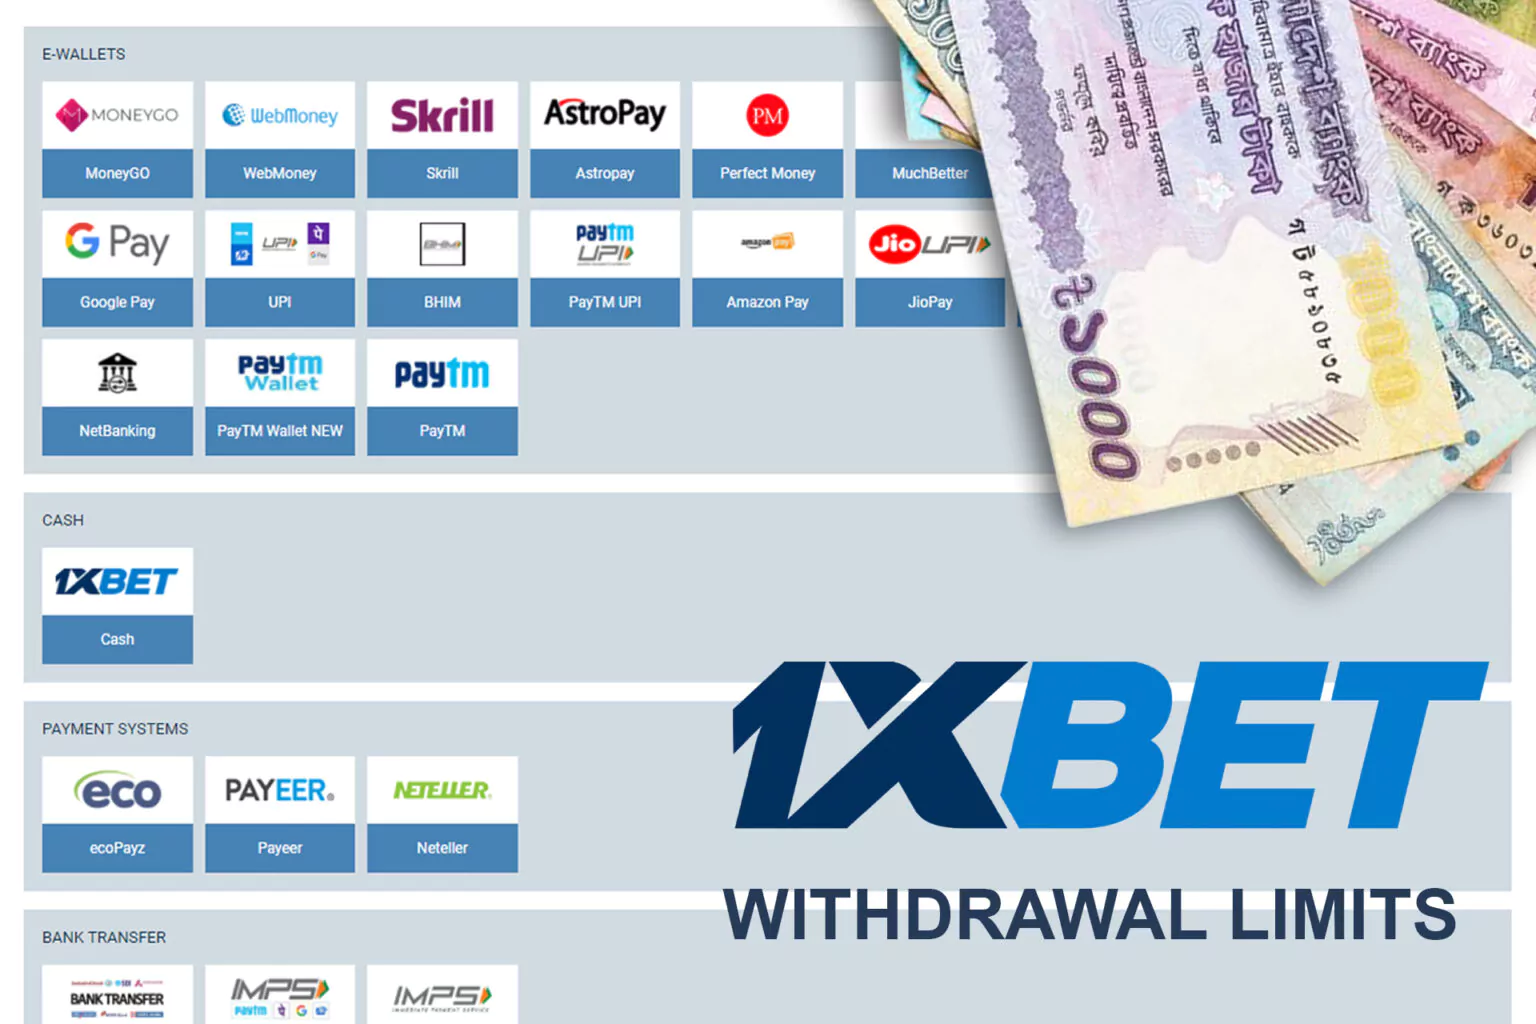 7 Facebook Pages To Follow About 1xbet Việt Nam